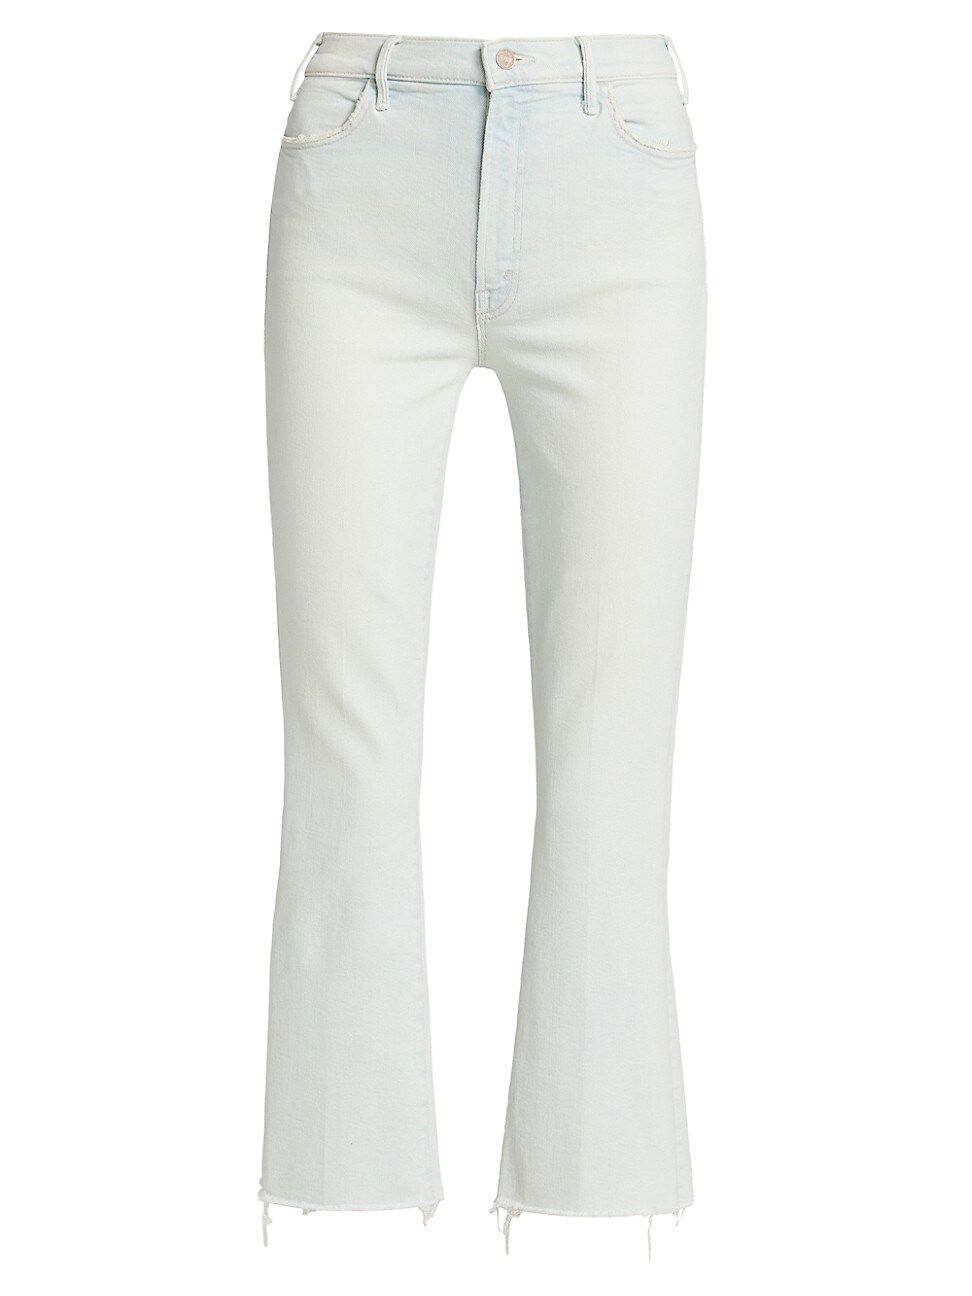 Women's The Hustler Ankle Fray Jeans - Pina Colada Paradise - Size 25 | Saks Fifth Avenue